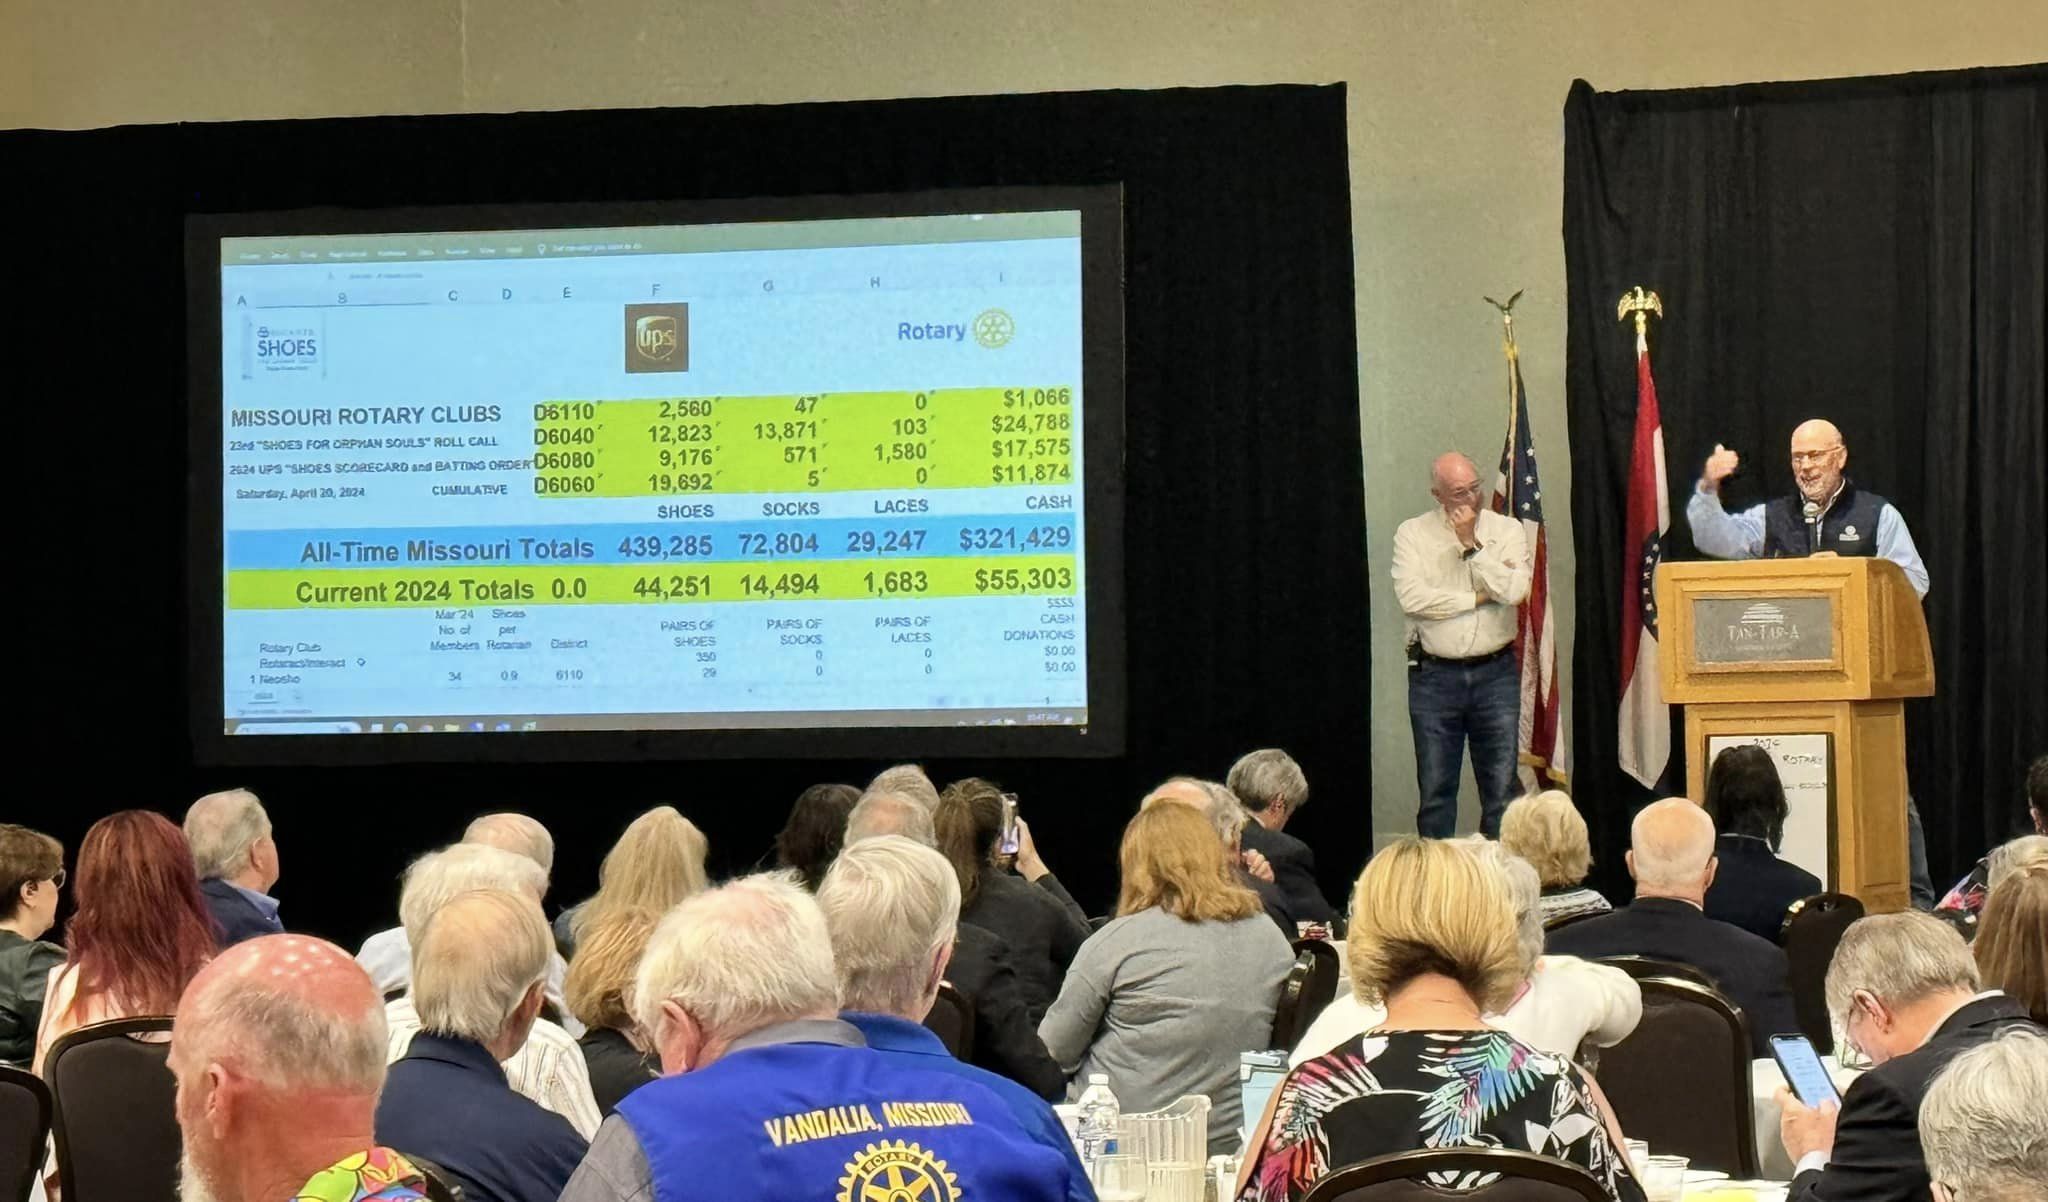 Missouri Rotarians watch the tally during the shoe roll call at their statewide conference April 20.